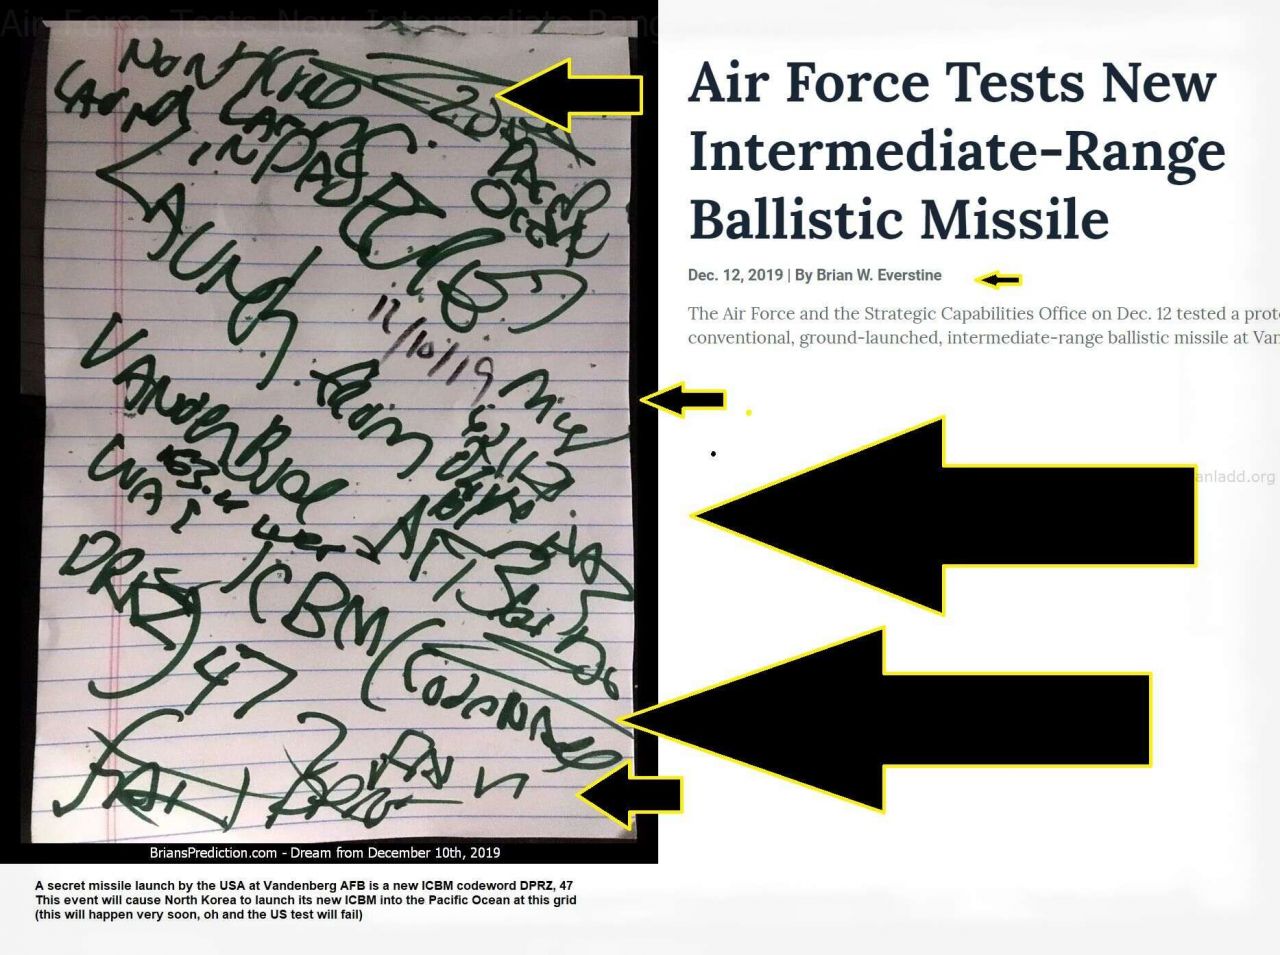 Air Force Tests New Intermediate-Range Ballistic Missile on December 12th 2019 this dream from just 2 days earlier confirmed the event
Air Force Tests New Intermediate-Range Ballistic Missile on December 12th 2019 this dream from just 2 days earlier confirmed the event
